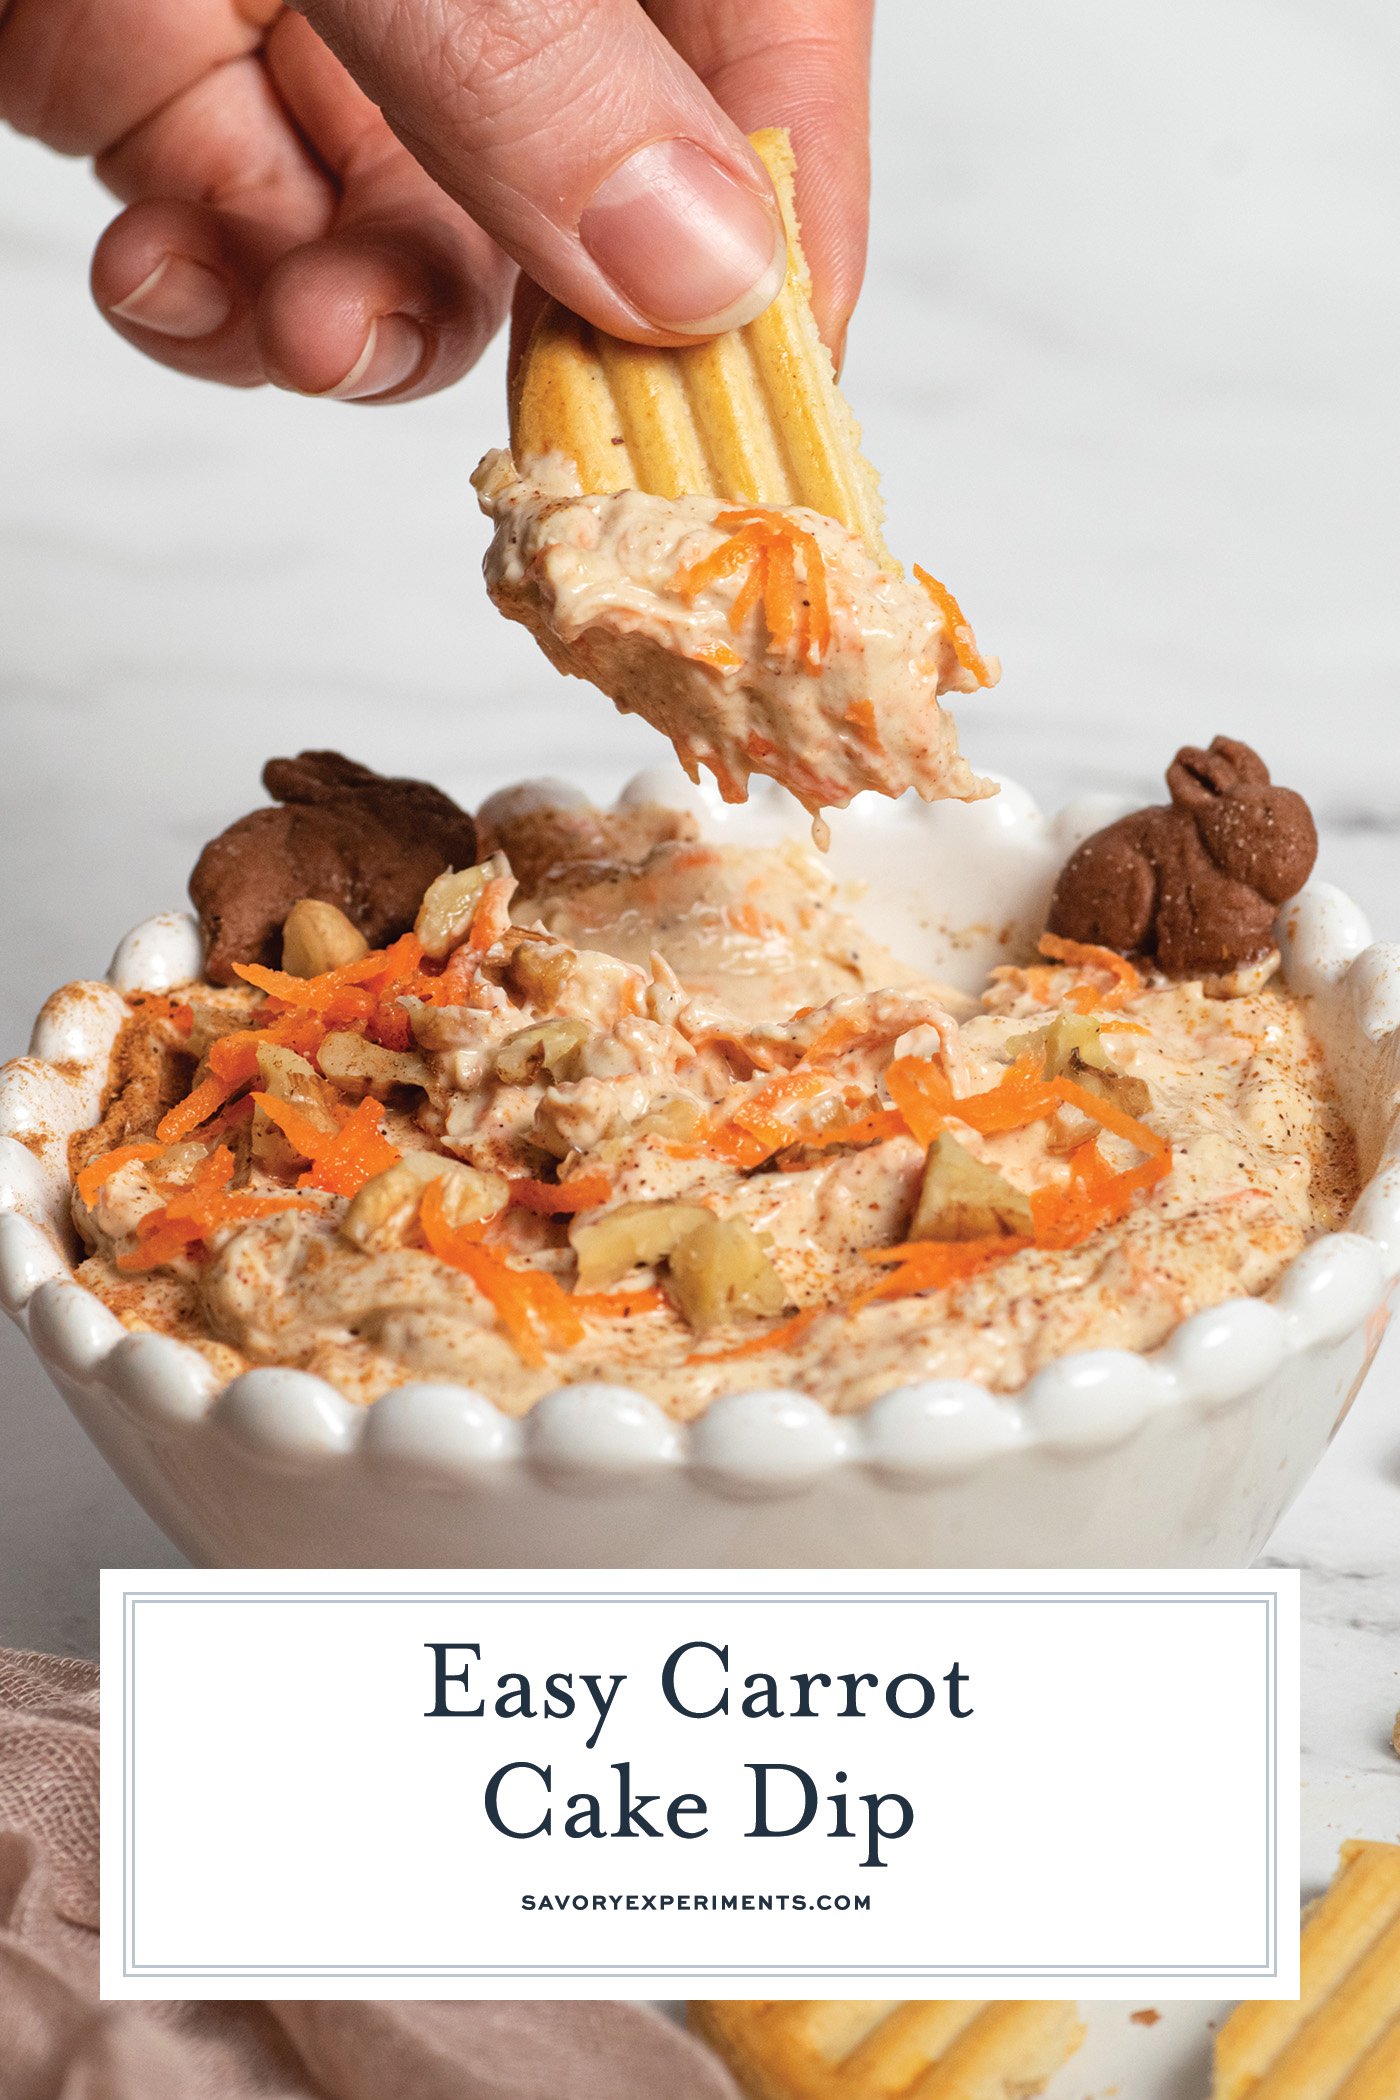 cookie dipping into carrot cake dip with text overlay for pinterest